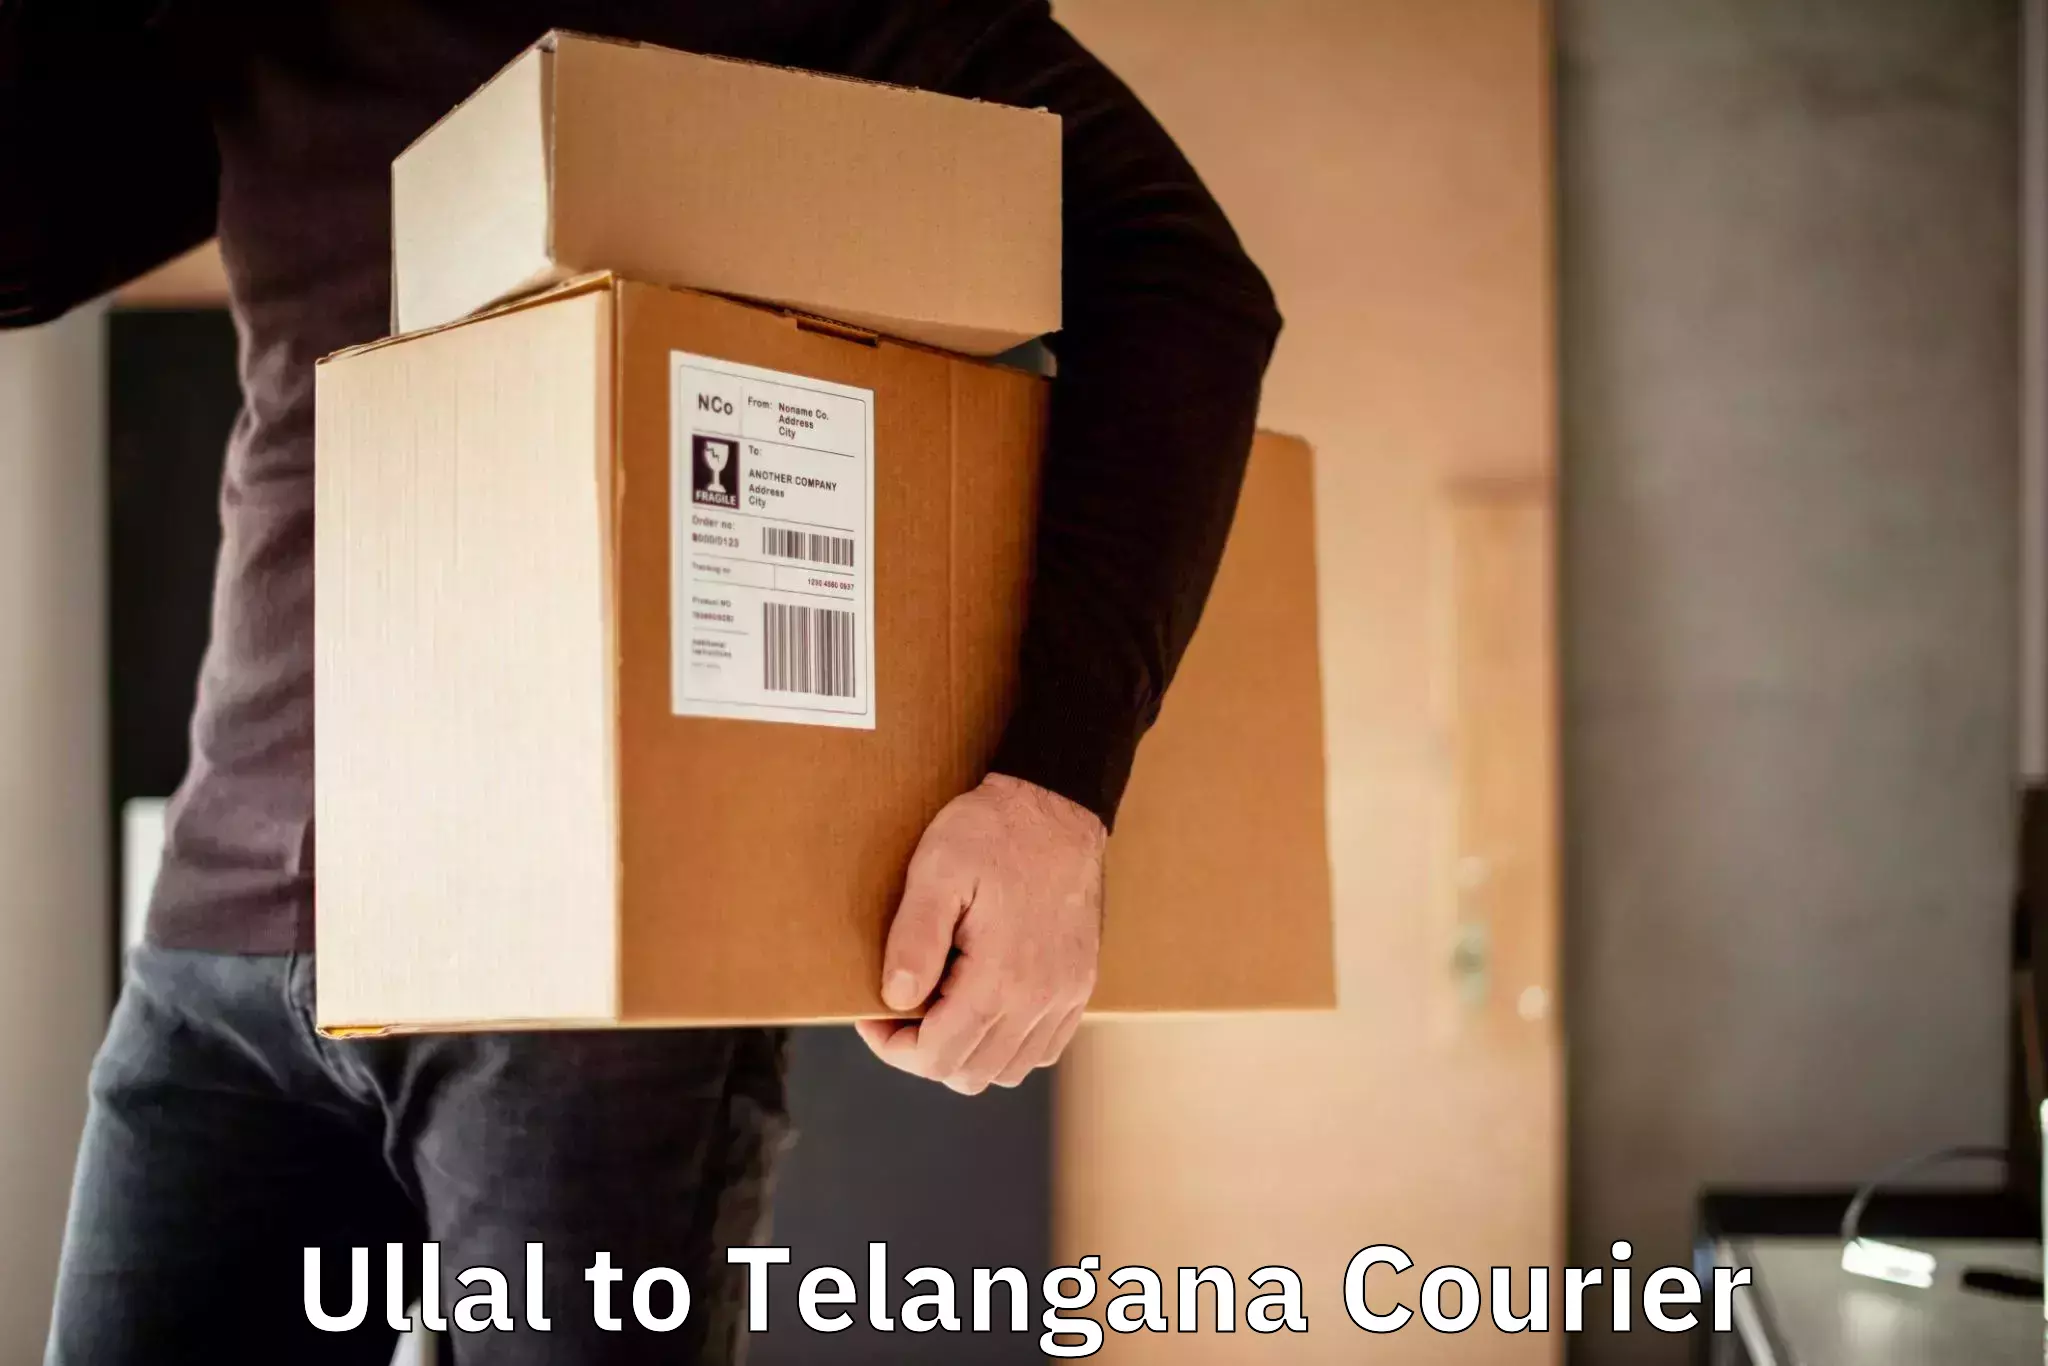 Automated parcel services Ullal to Gangadhara